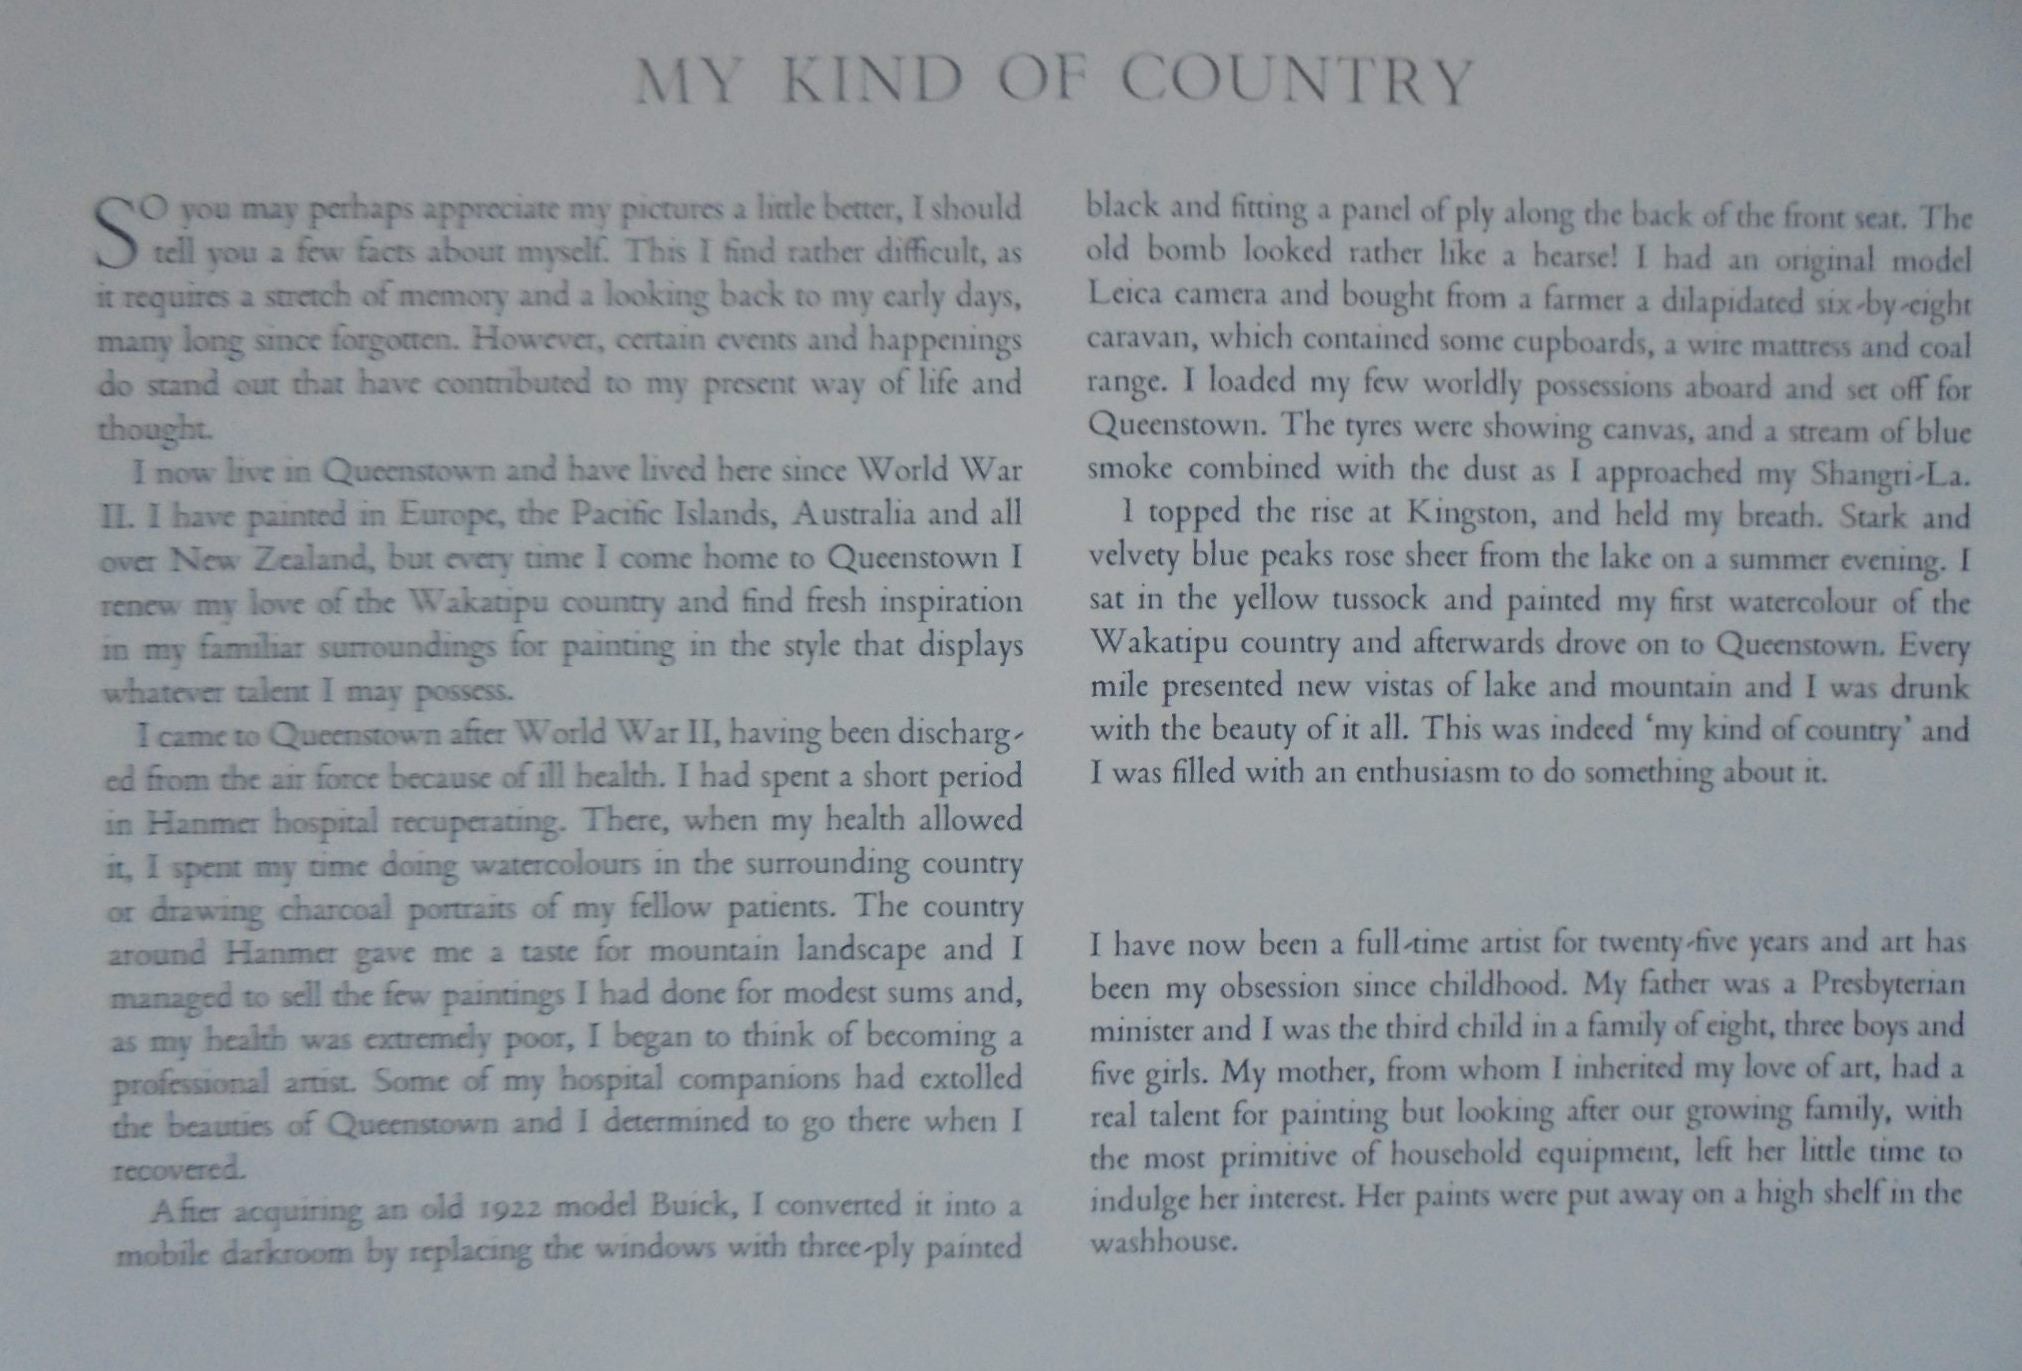 My Kind of Country by Douglas Badcock. 1971 first edition